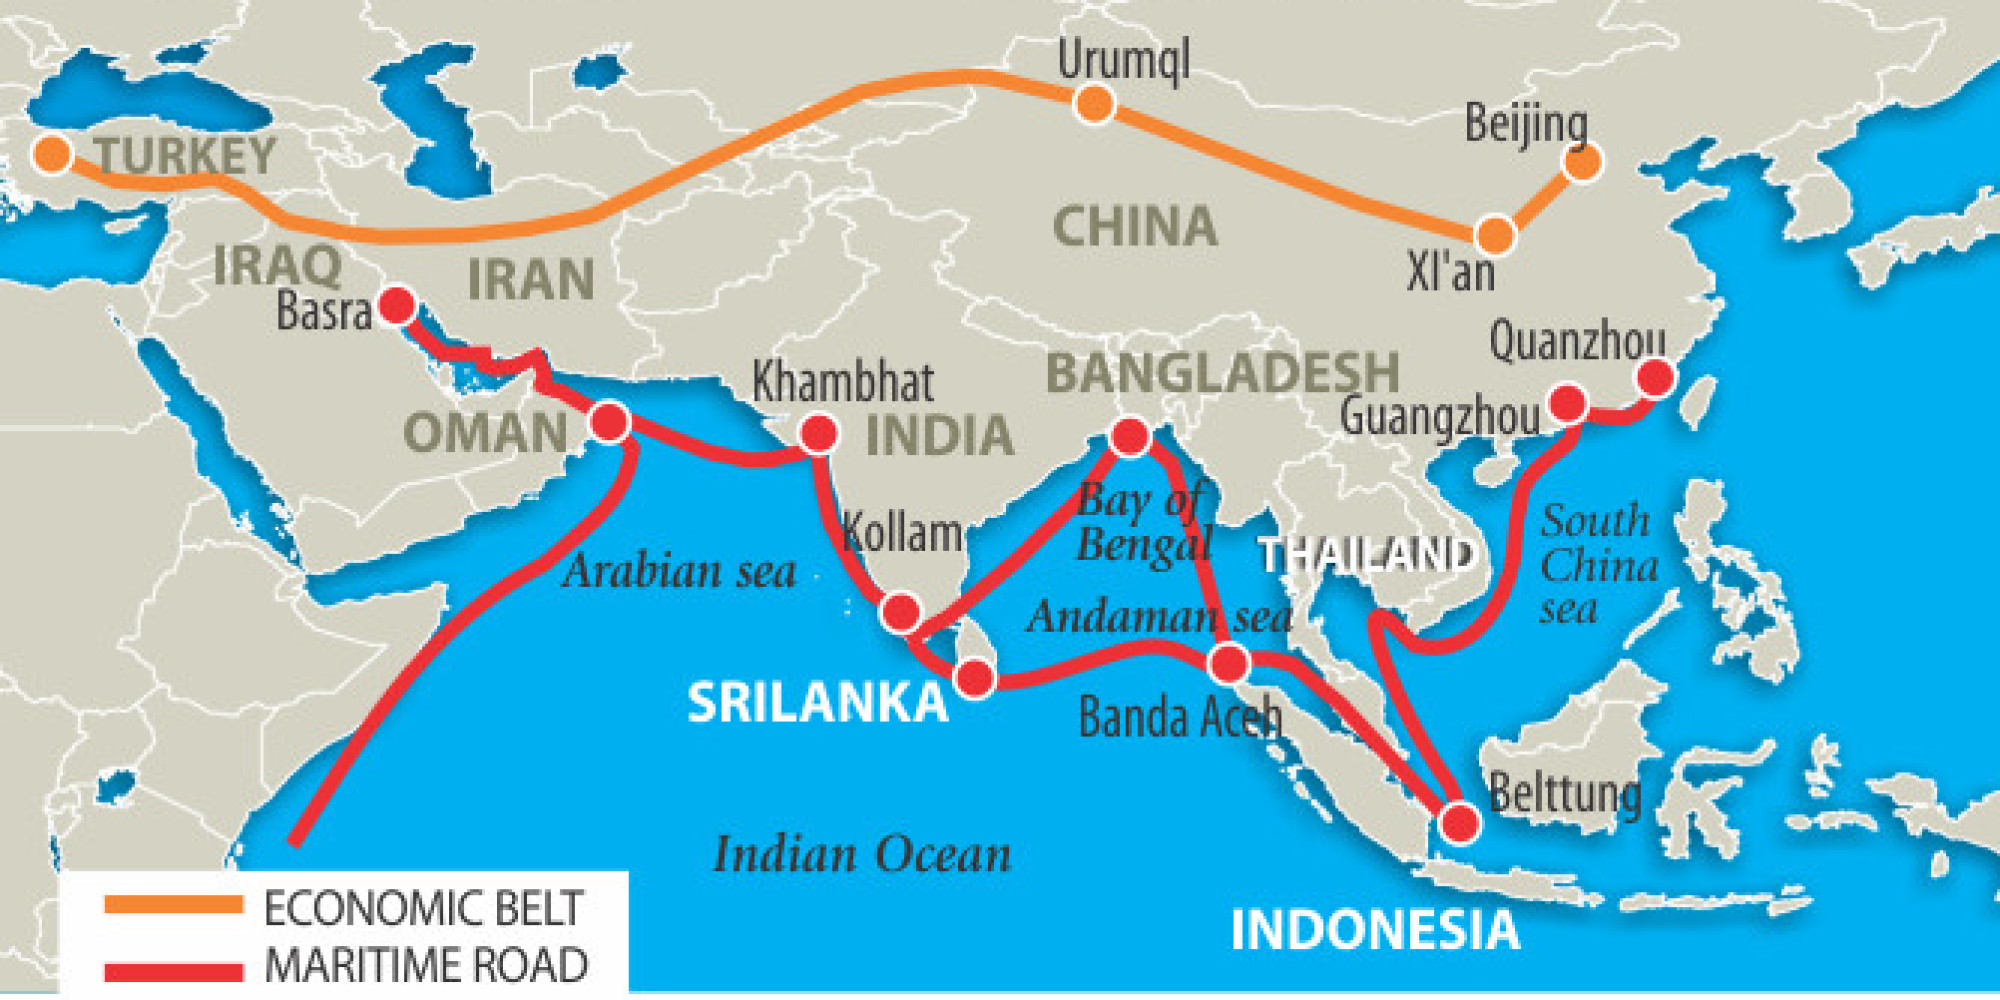 What Are Chinese Submarines Doing in the Indian Ocean? | HuffPost